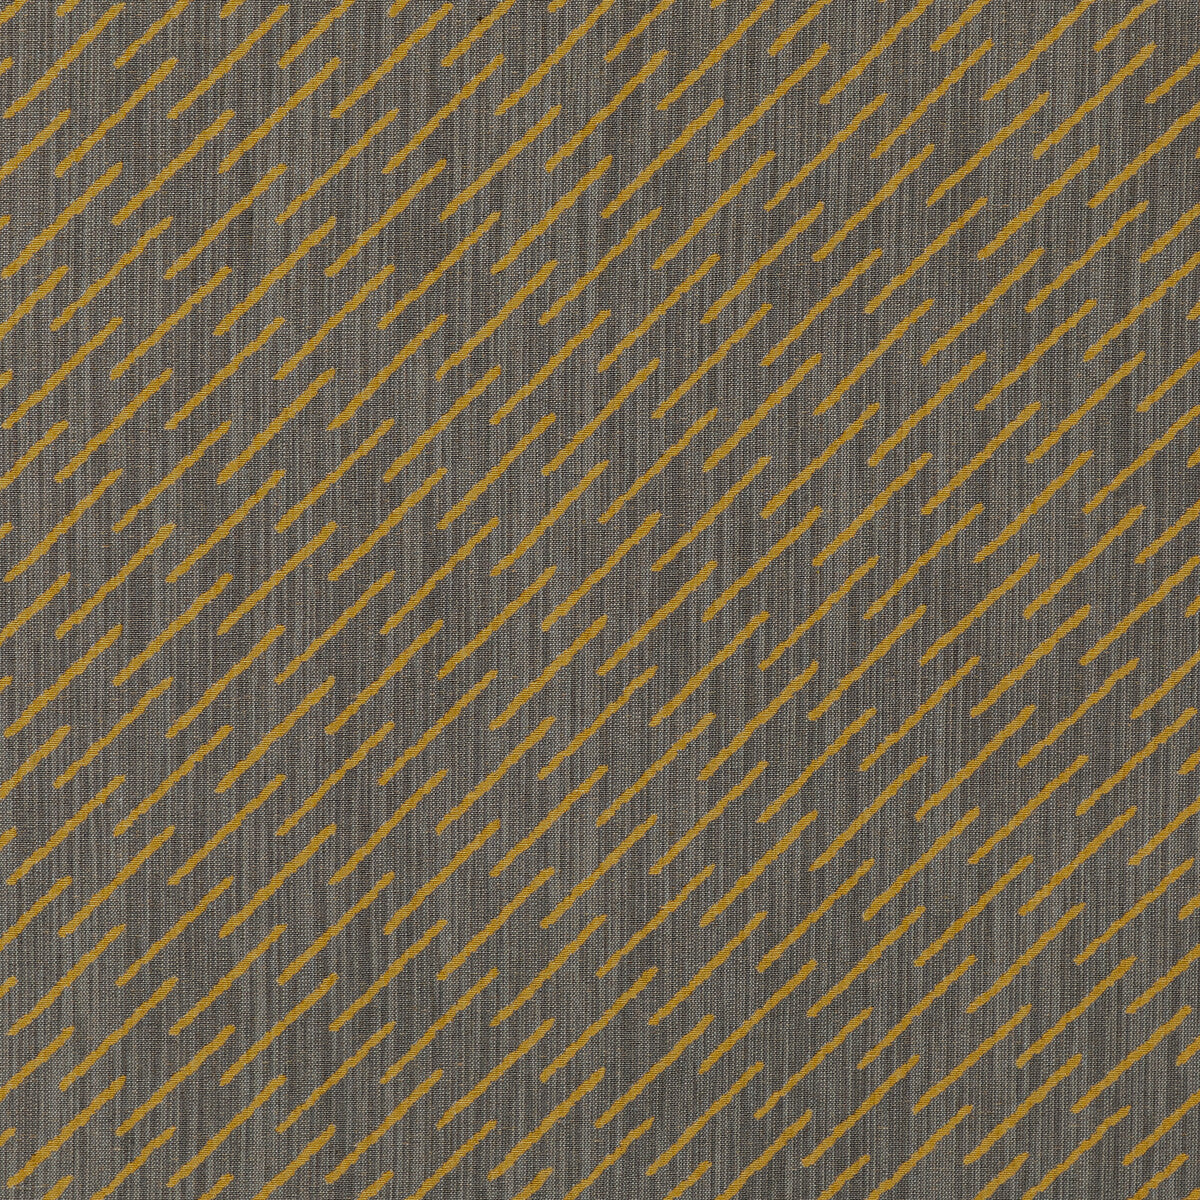 Esker Weave fabric in coin/taupe color - pattern GWF-3759.1064.0 - by Lee Jofa Modern in the Kelly Wearstler VI collection